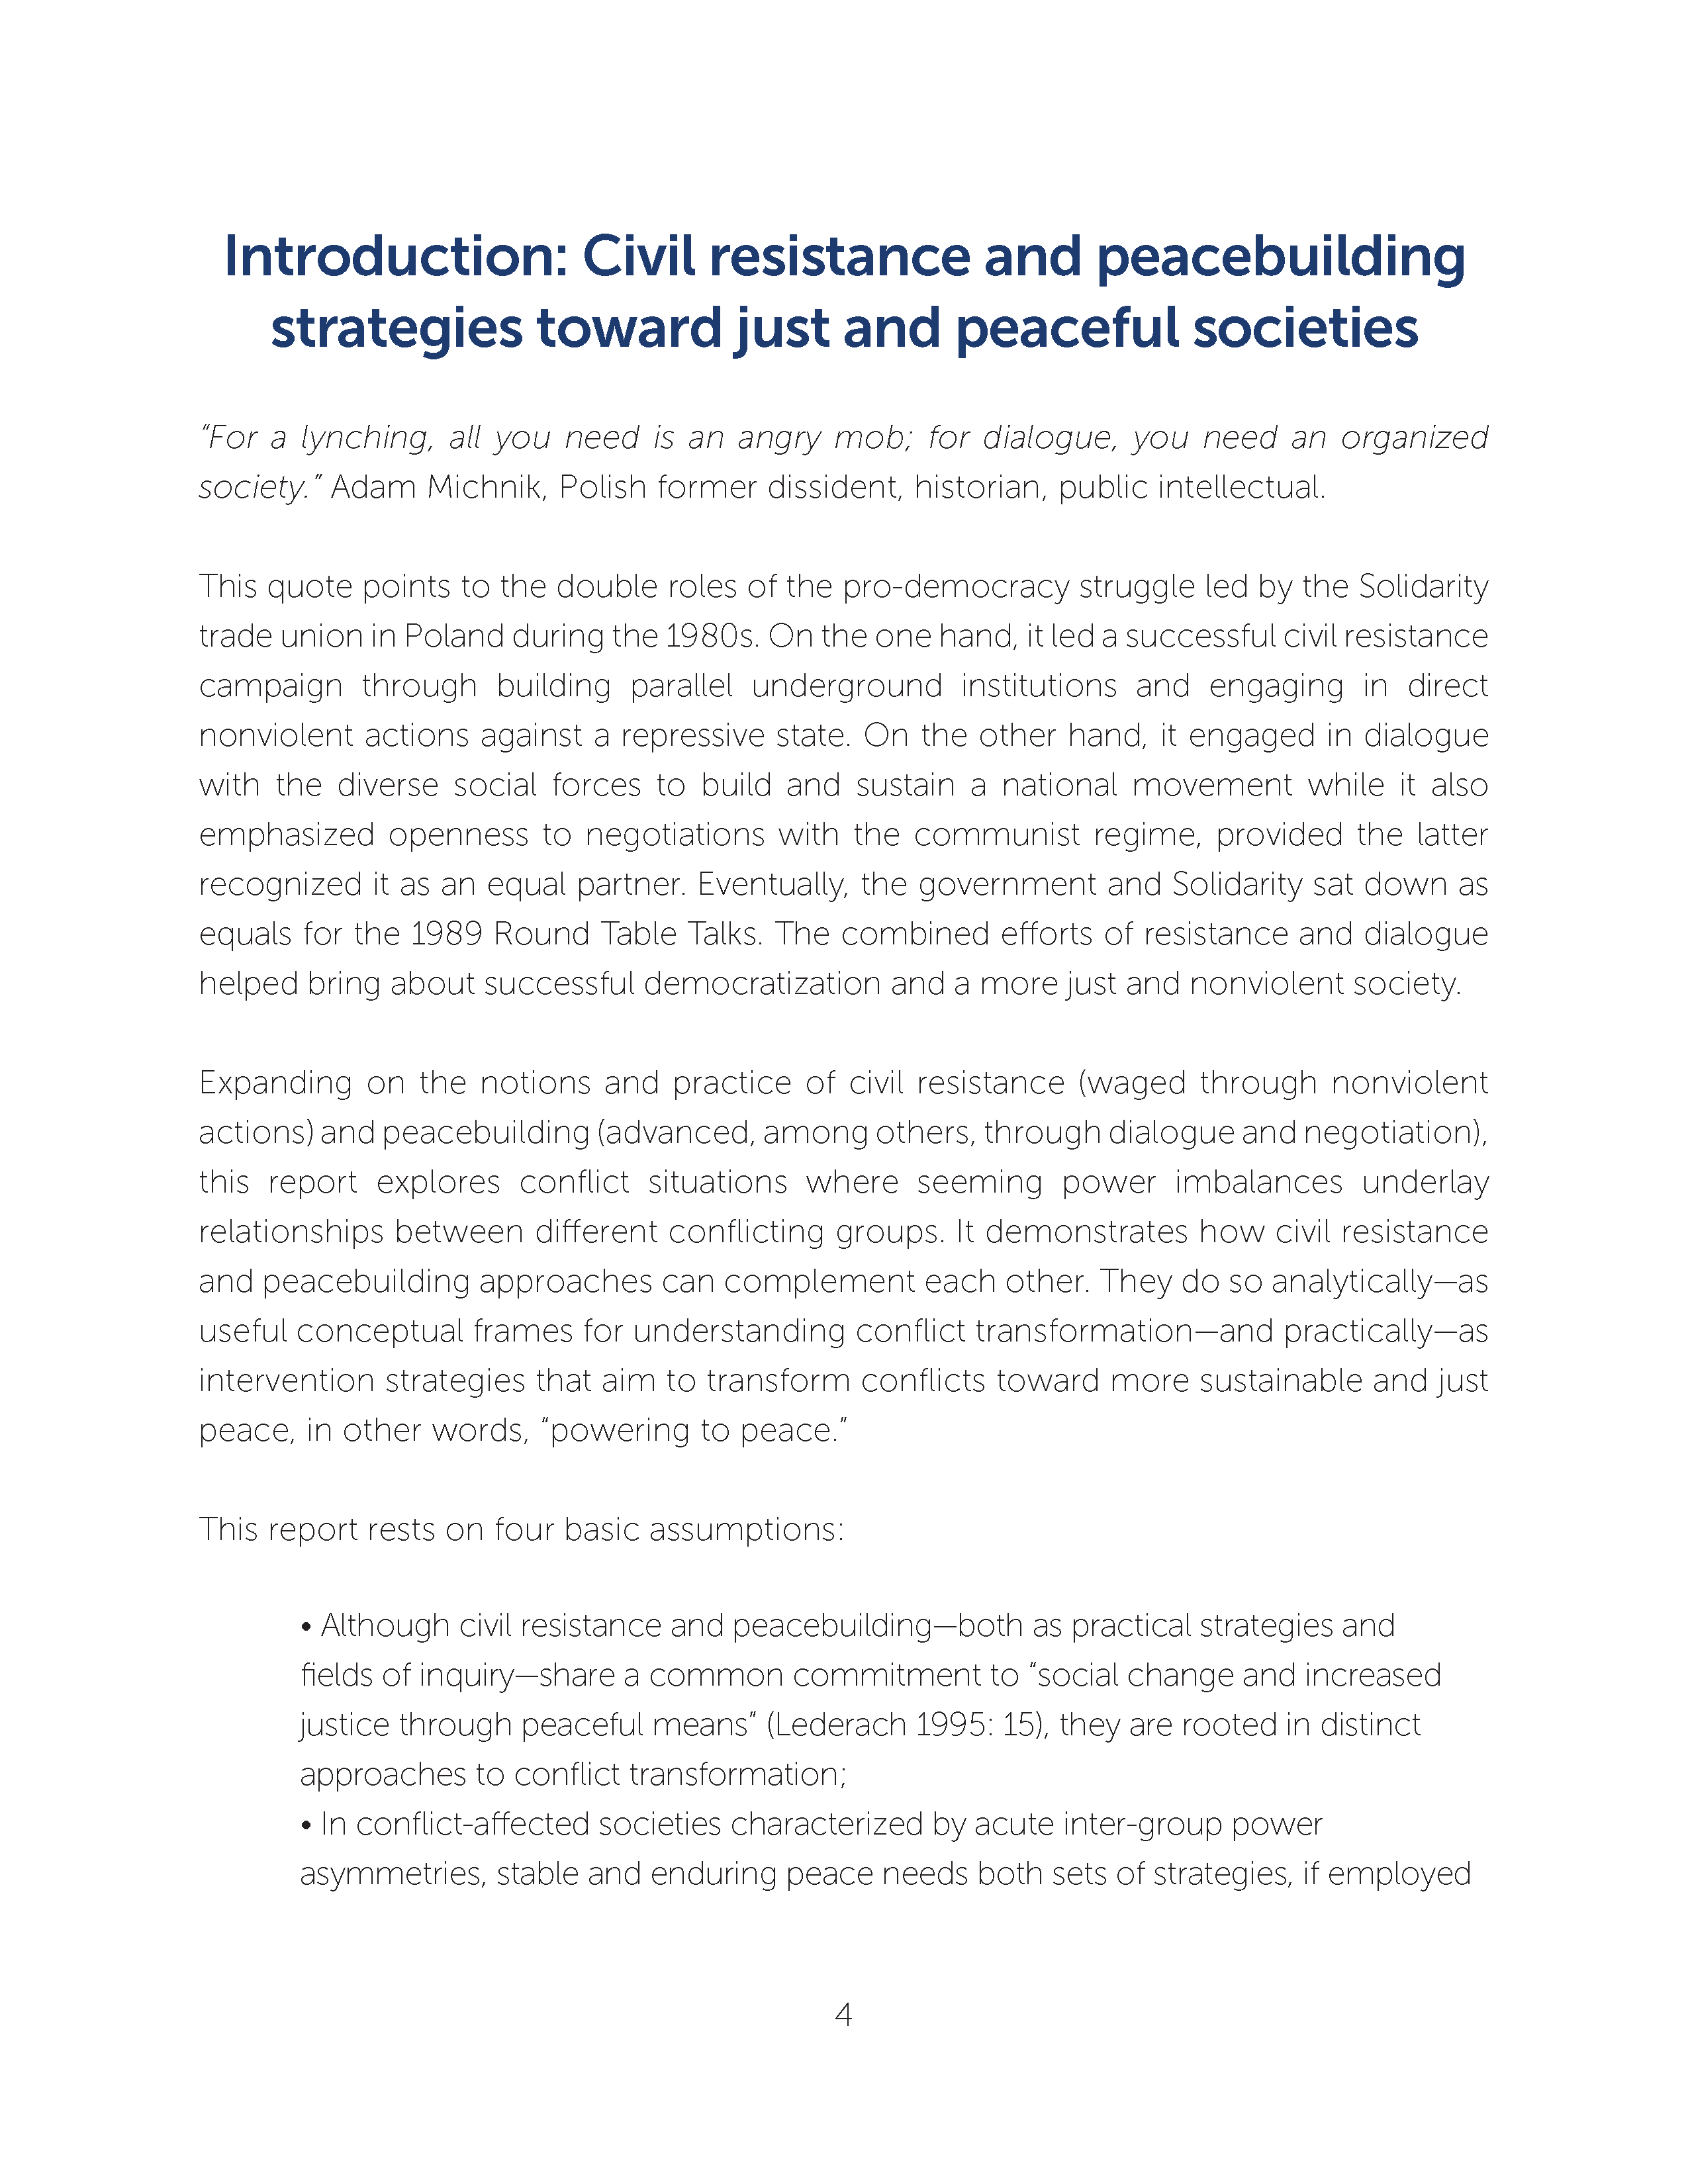 Powering to Peace: Integrated Civil Resistance and Peacebuilding Strategies